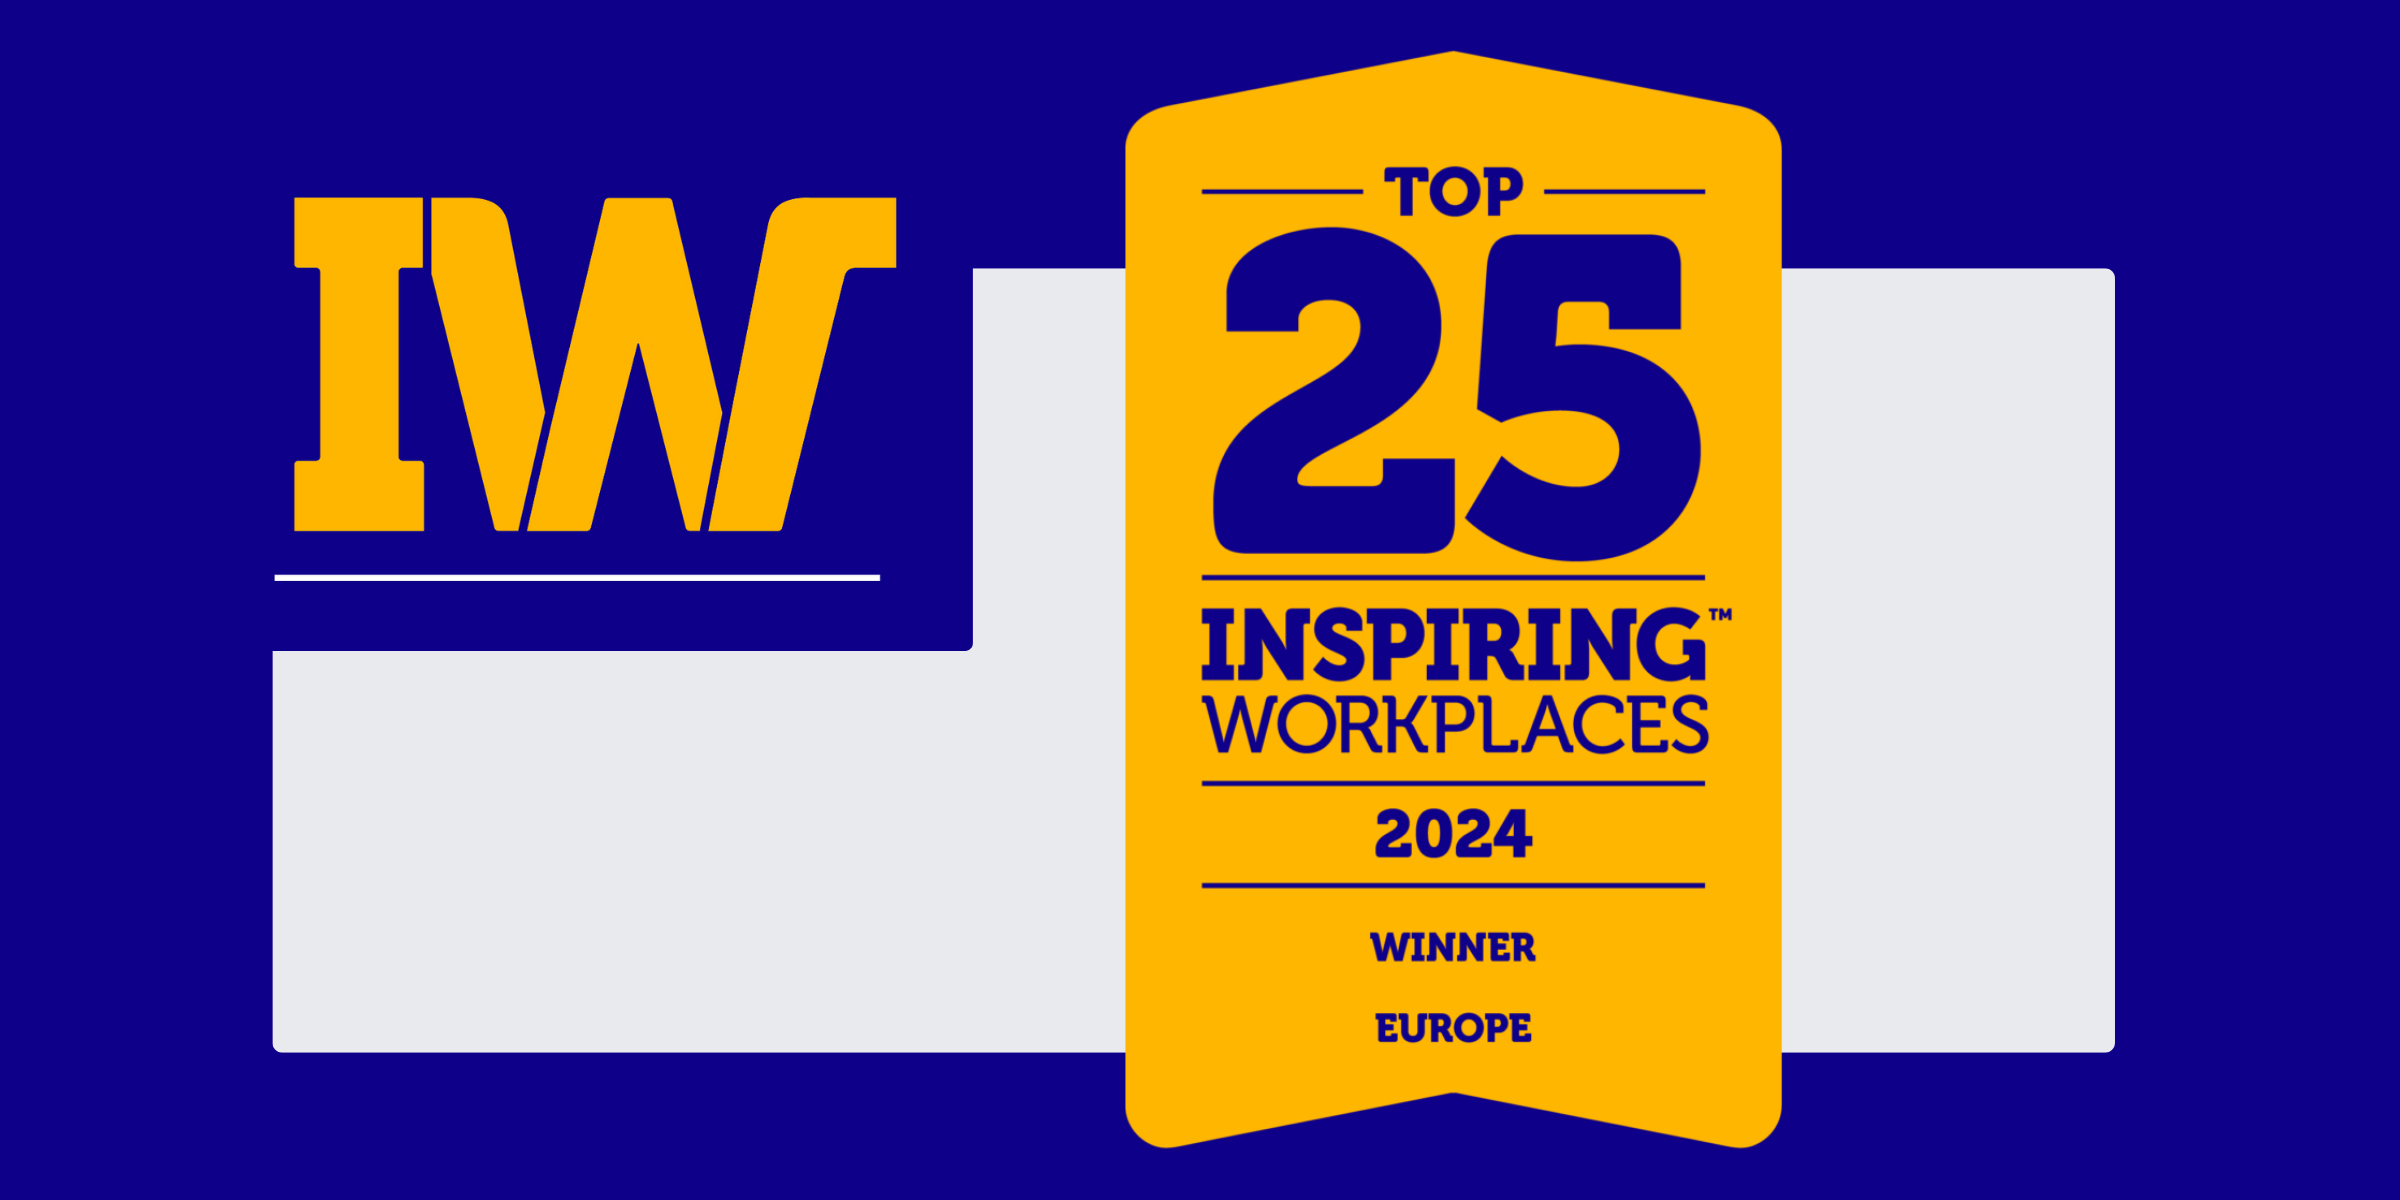 Celebrating Our Win as an Inspiring Workplace 2024